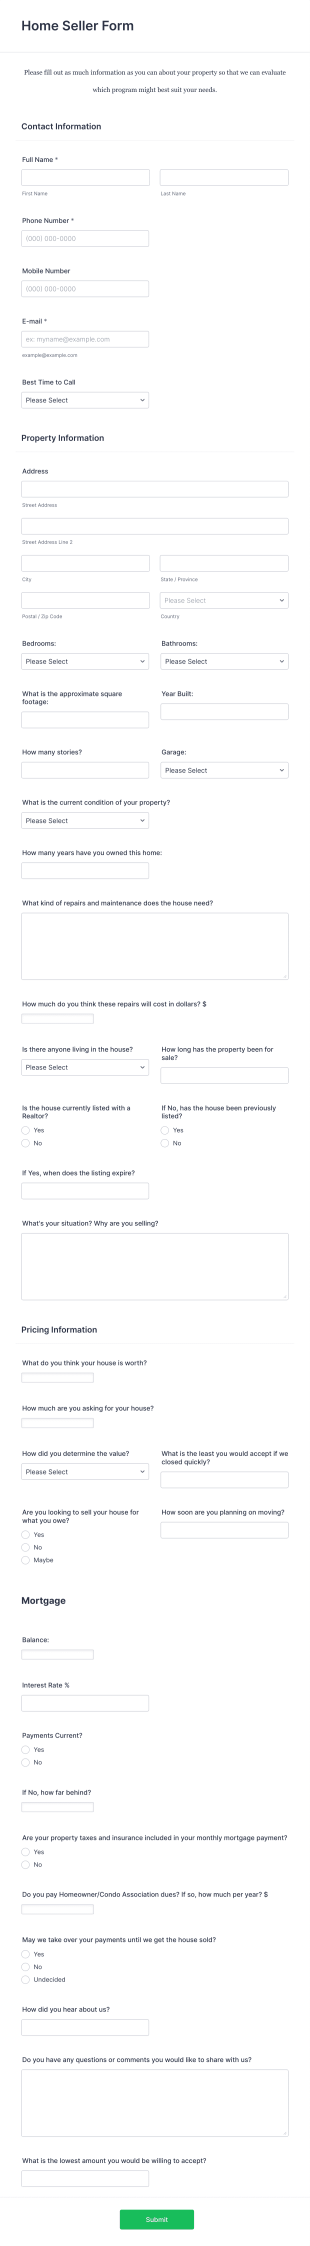 House Seller Form Template